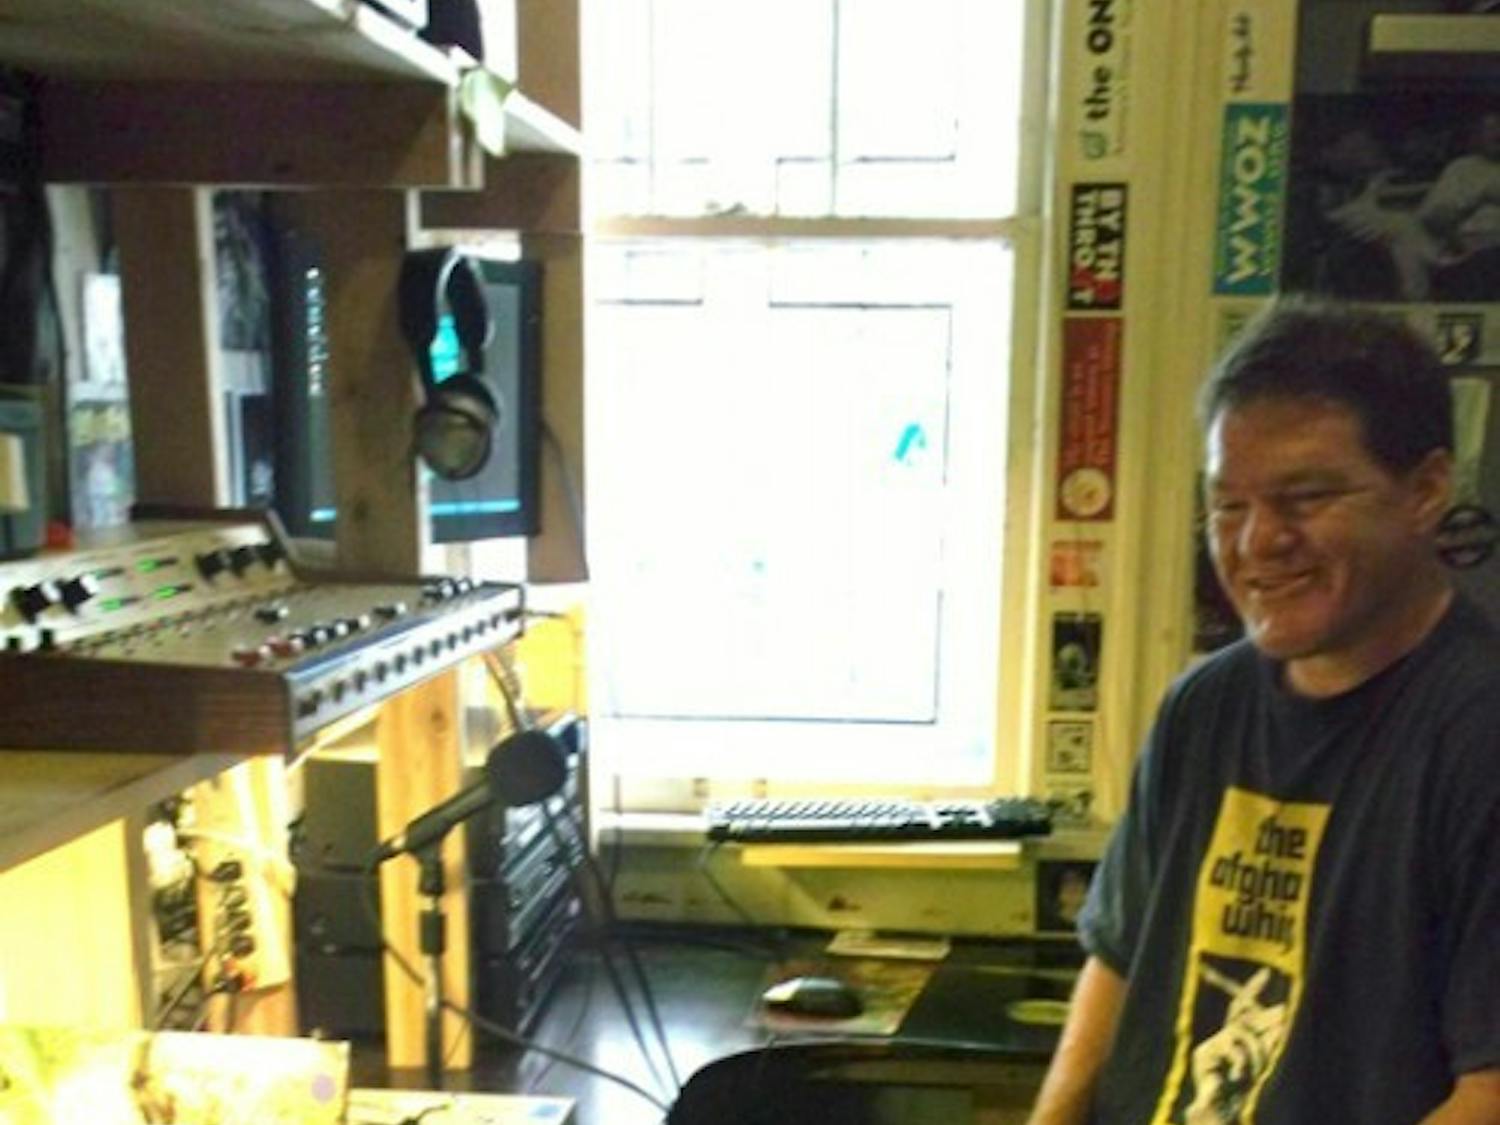 Grow Radio founder Bill Bryson sits in his radio studio located in downtown Gainesville.